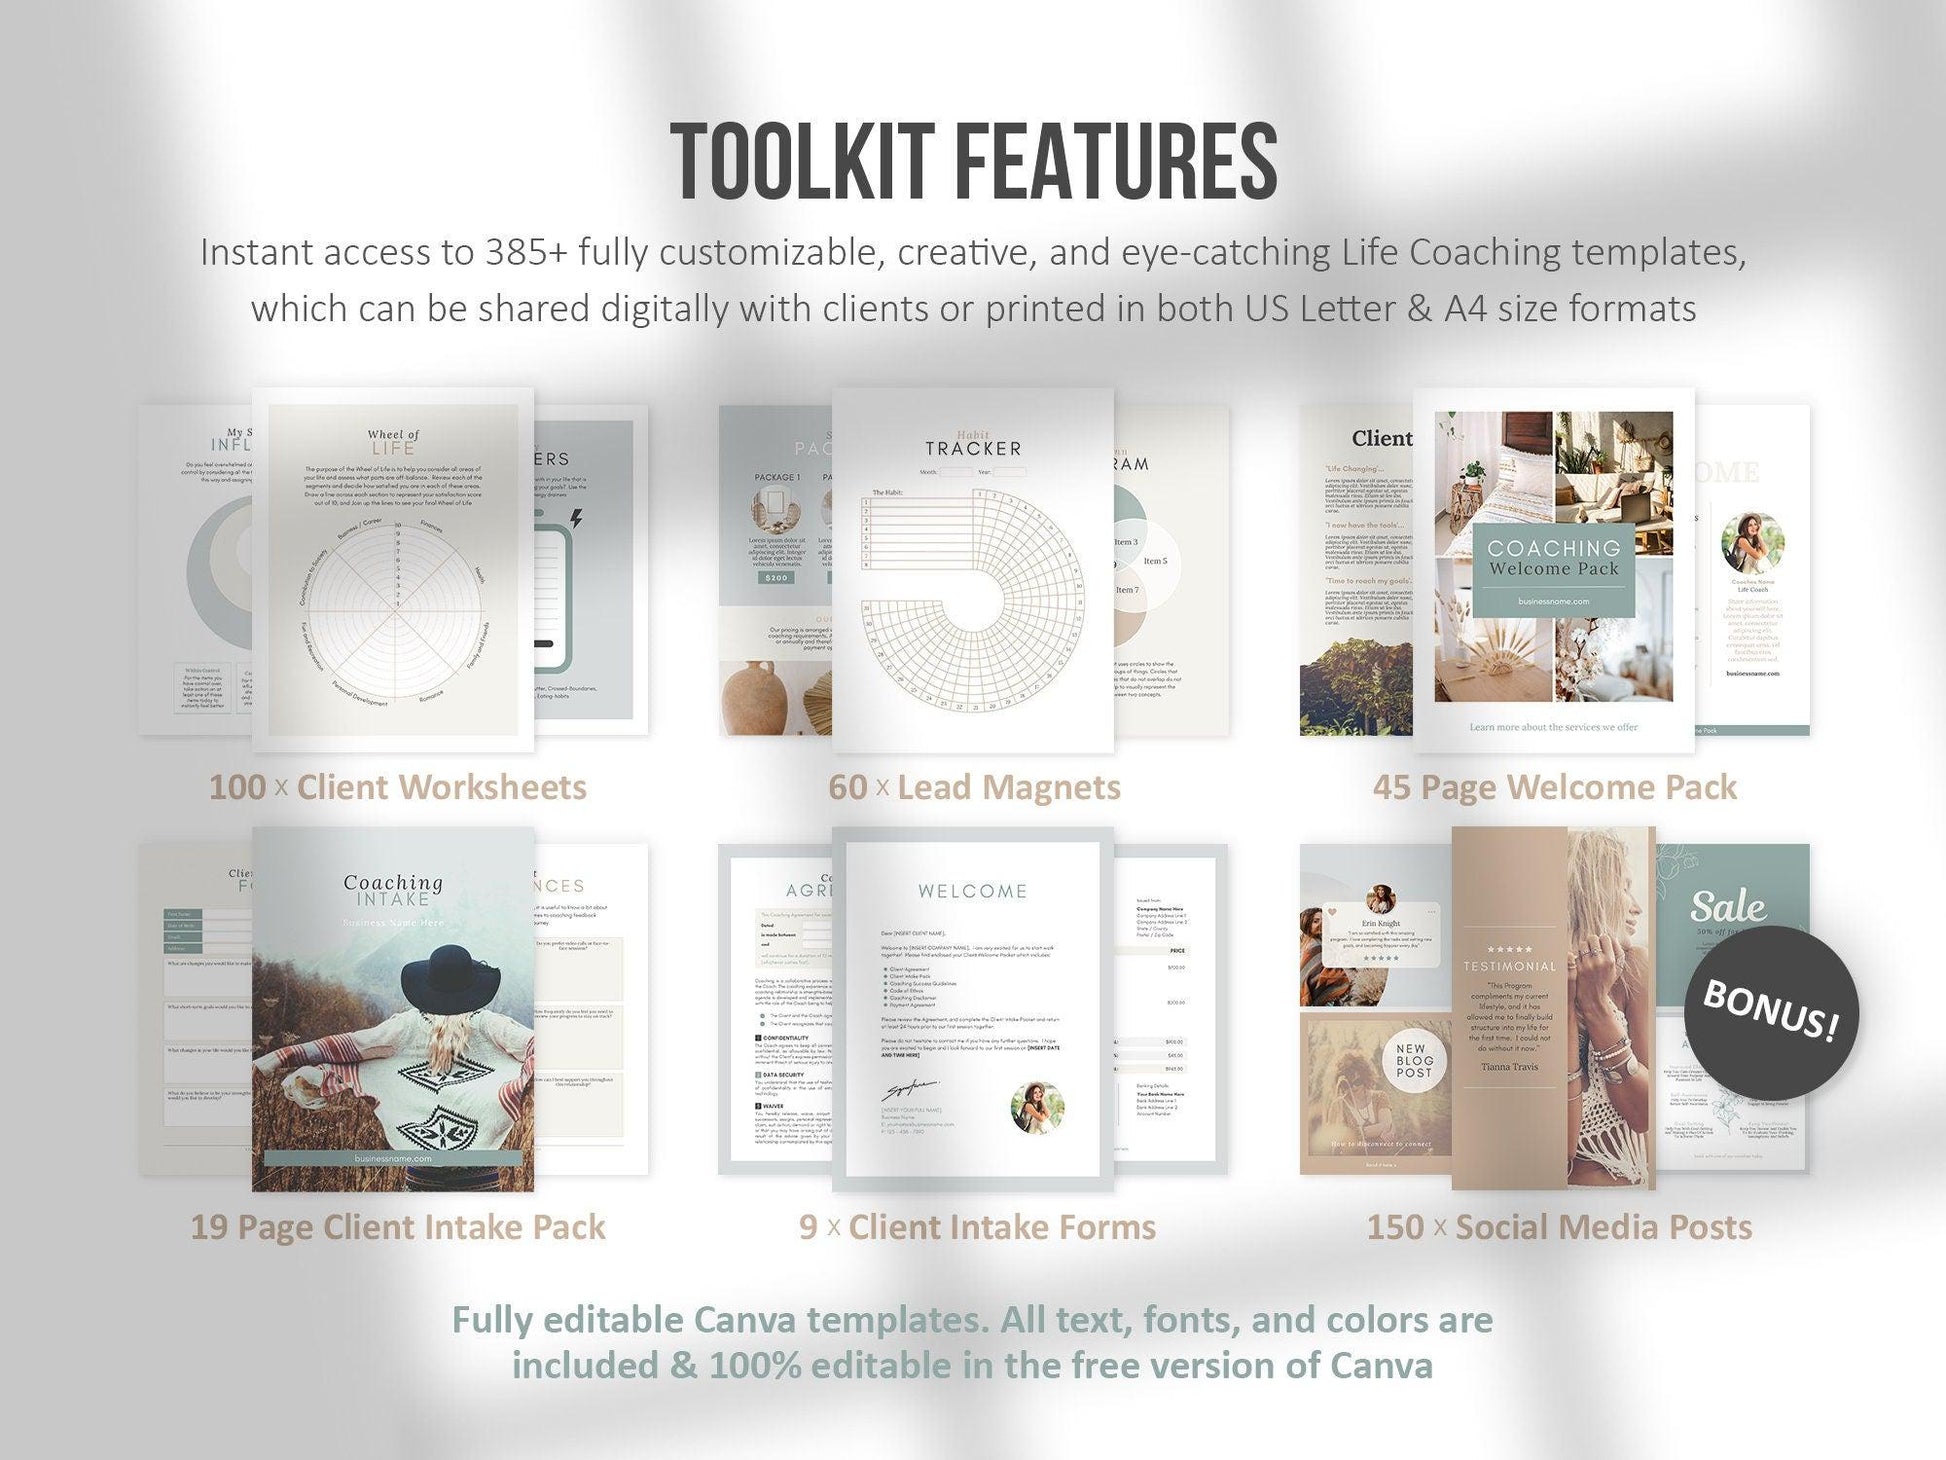 385+ Life Coaching Client Onboarding Toolkit (neutral)